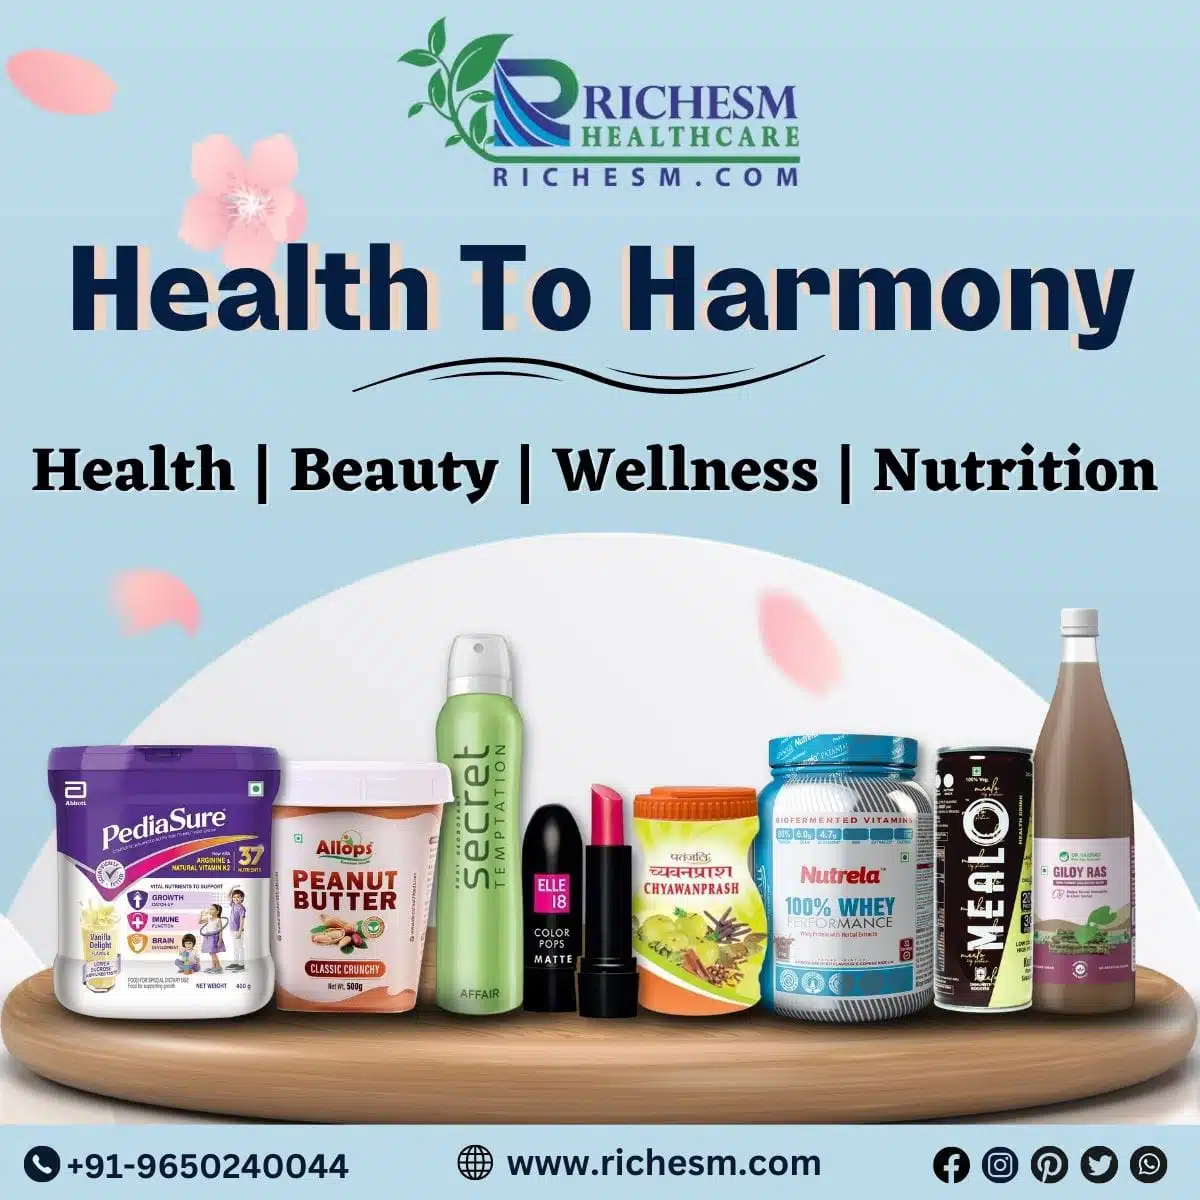 Buy Nutrition And Wellness Products From RichesM